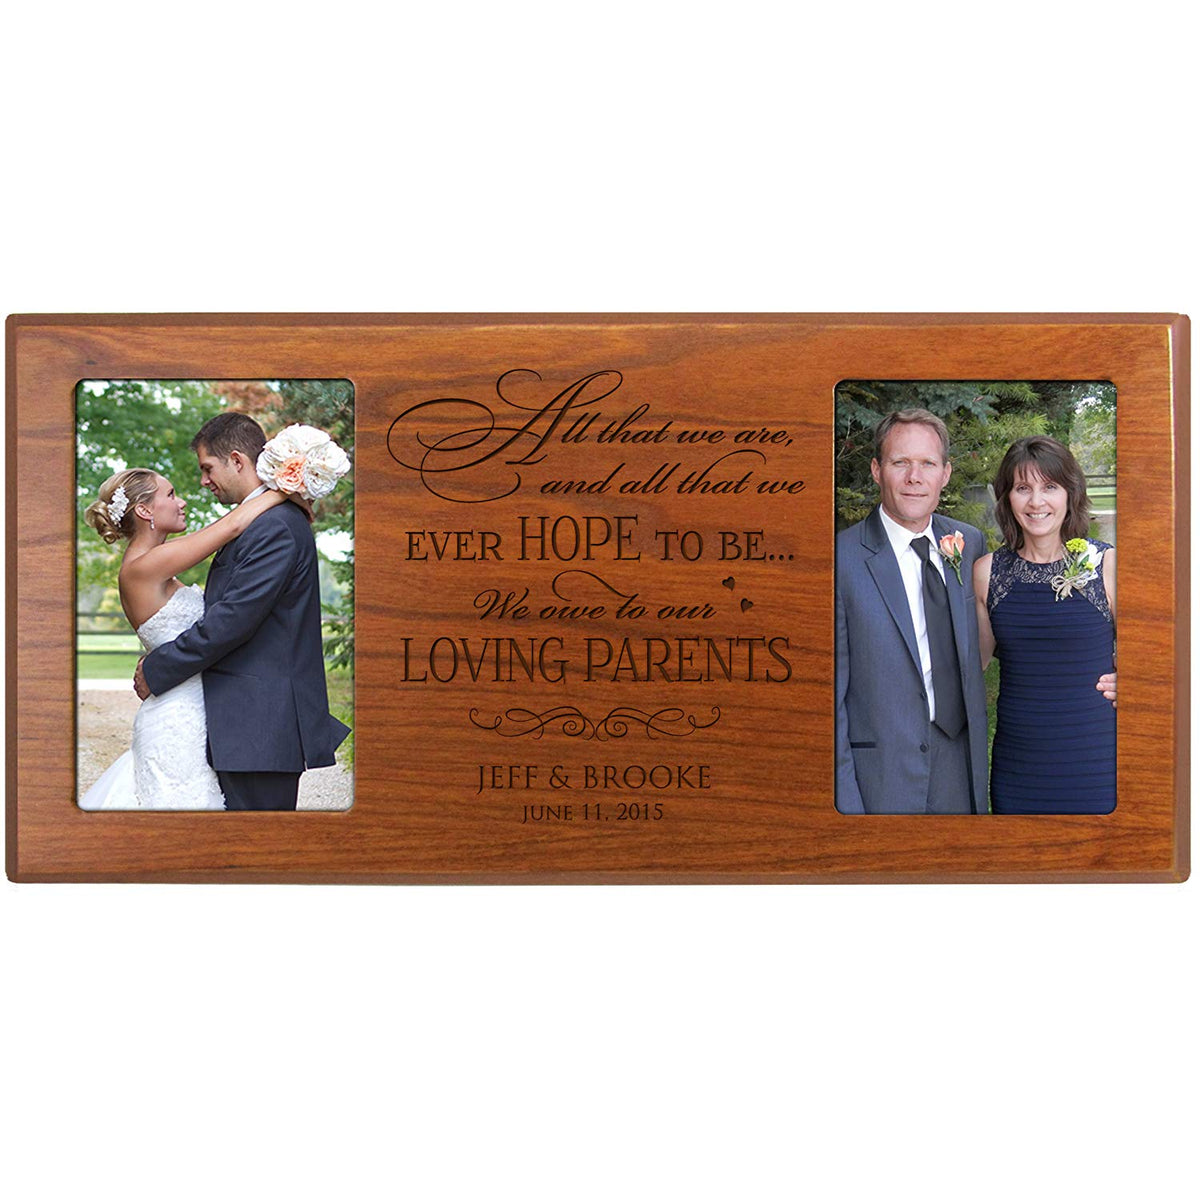 Personalized Wedding Double Picture Frame Gift - Loving Parents - LifeSong Milestones